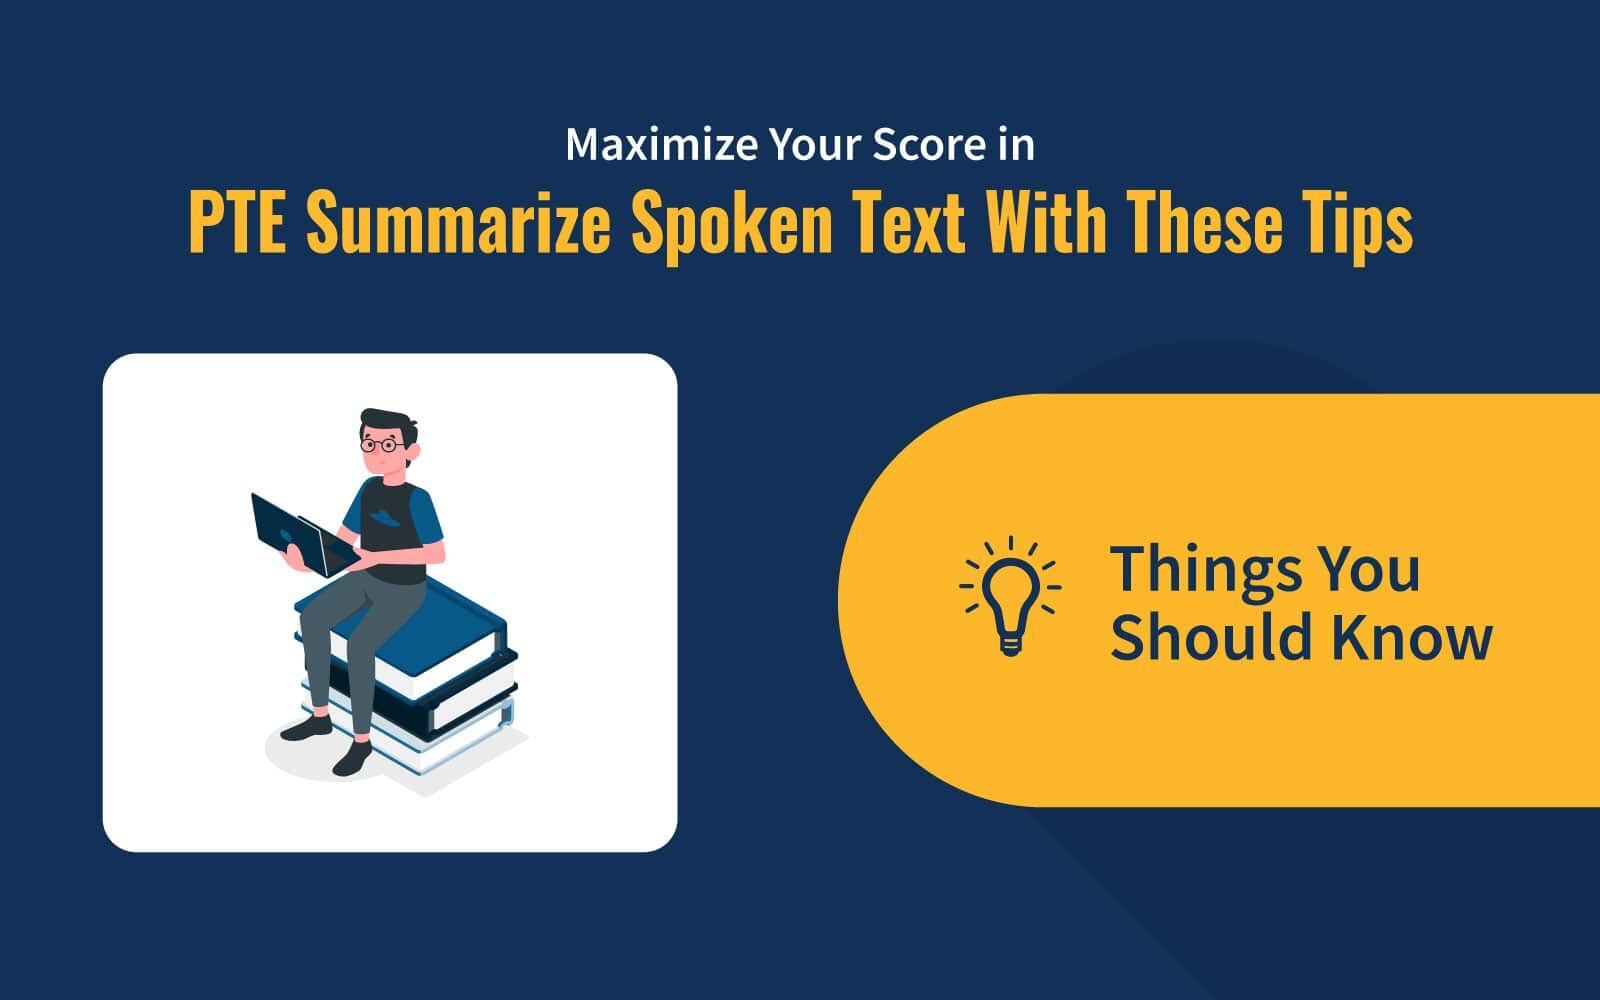 Maximize Your Score in PTE Summarize Spoken Text With These Tips image